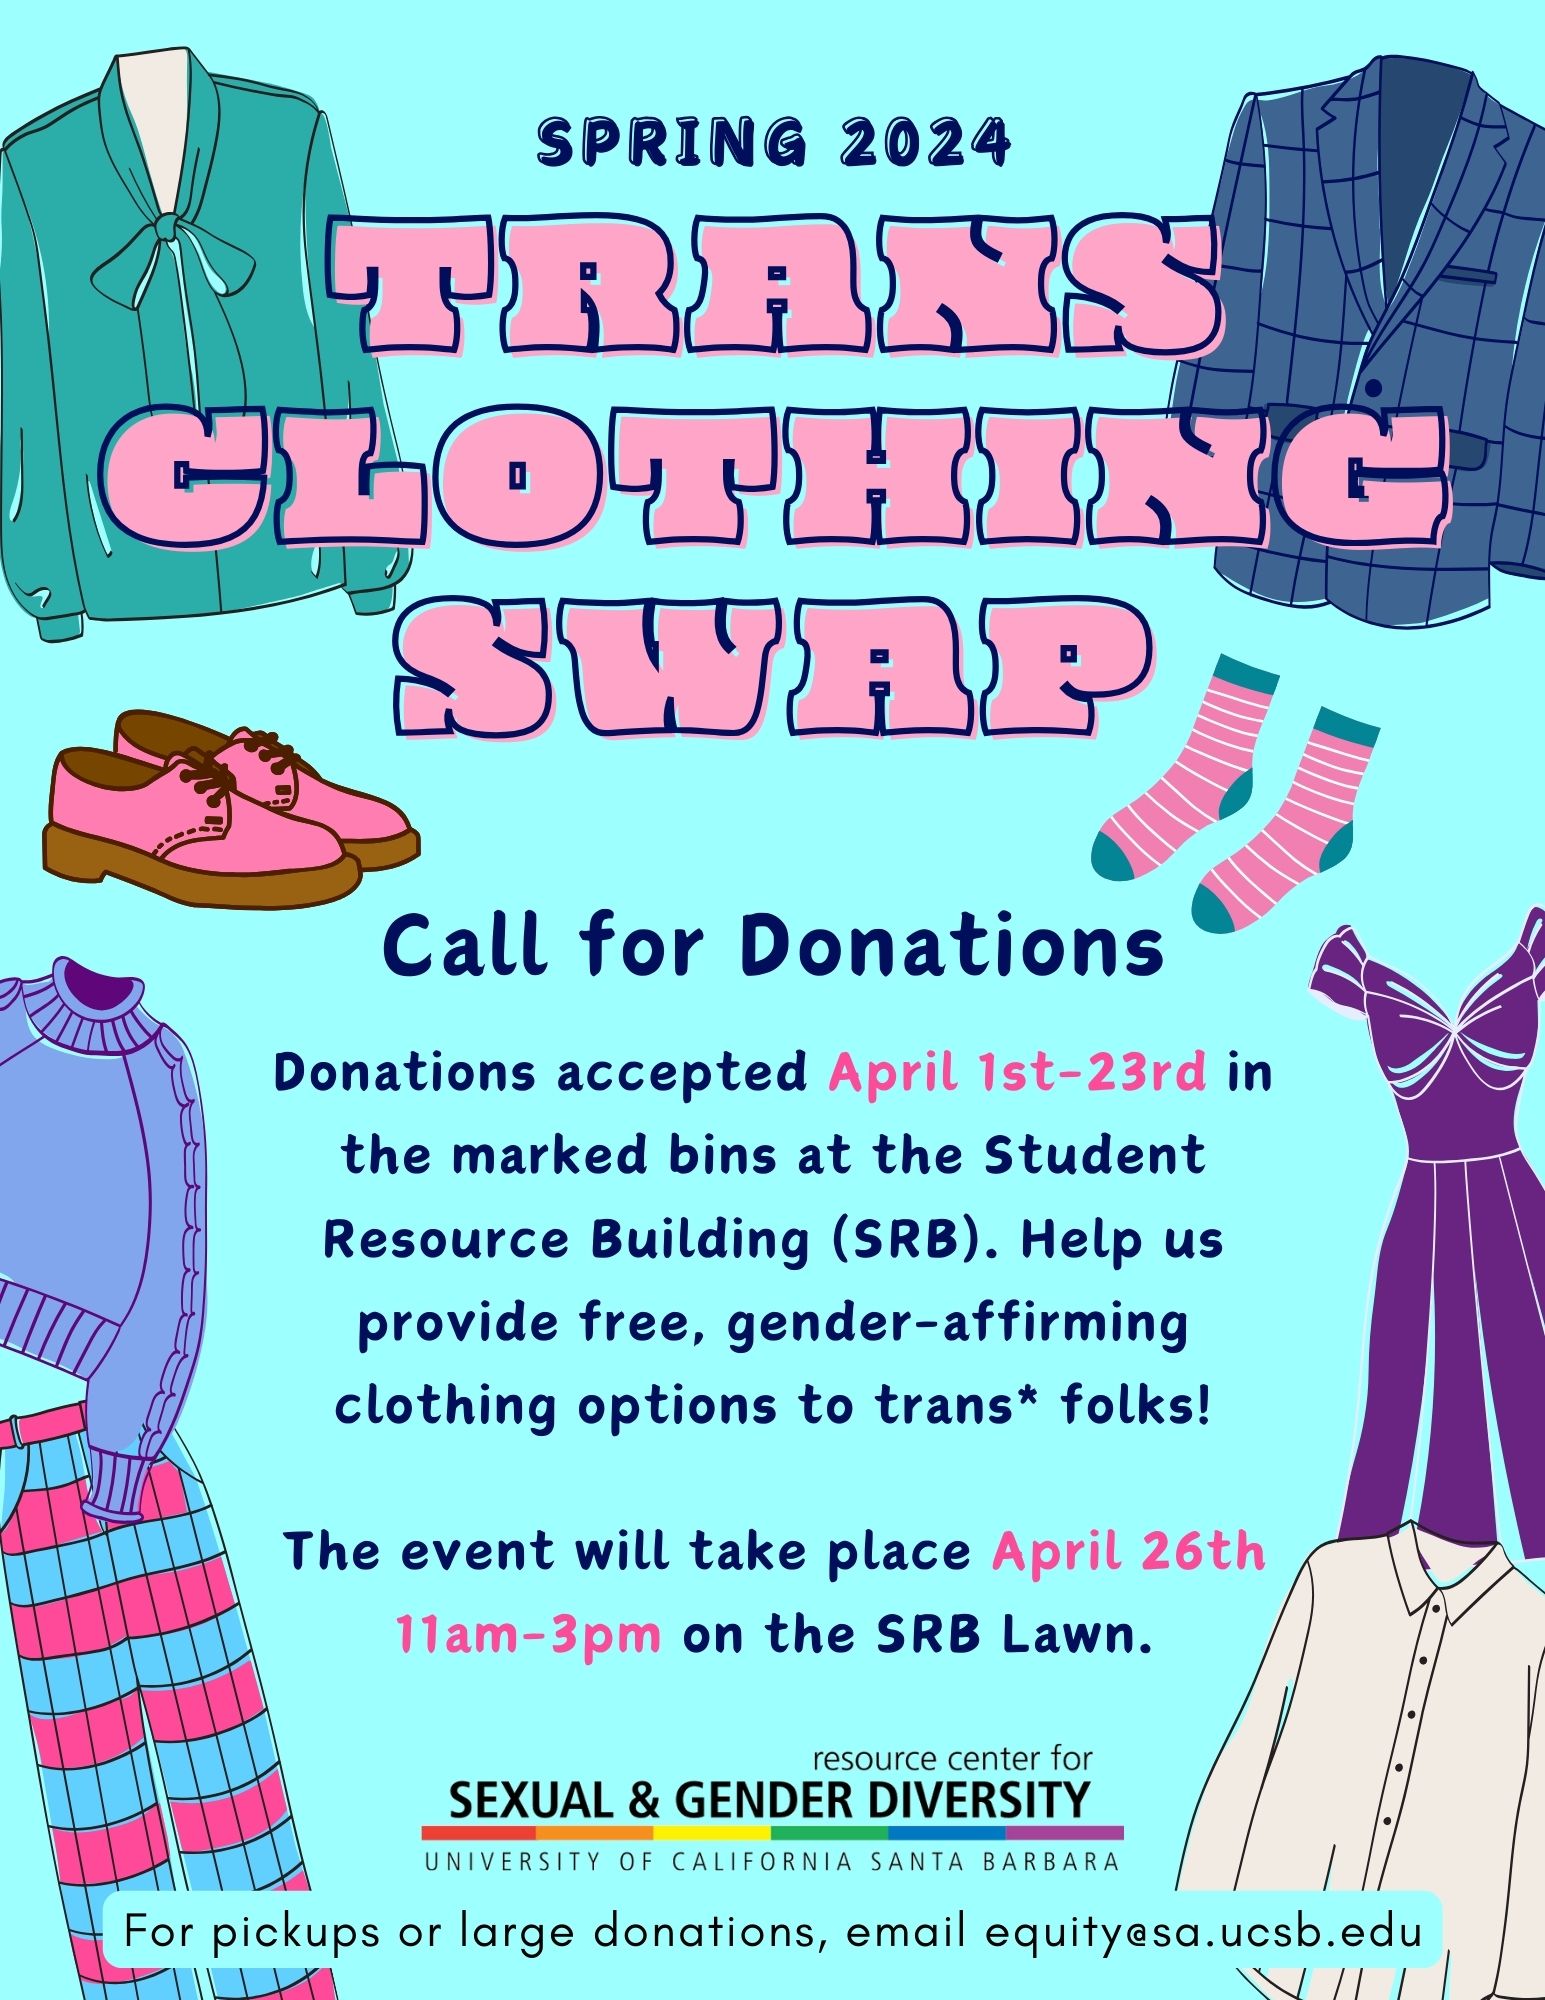 Trans Clothing Swap call for donations. Donations accepted April 1st - 23rd in the marked bins at the student resource building (SRB). This event will take place April 26th, 11am-3pm on the SRB Lawn.